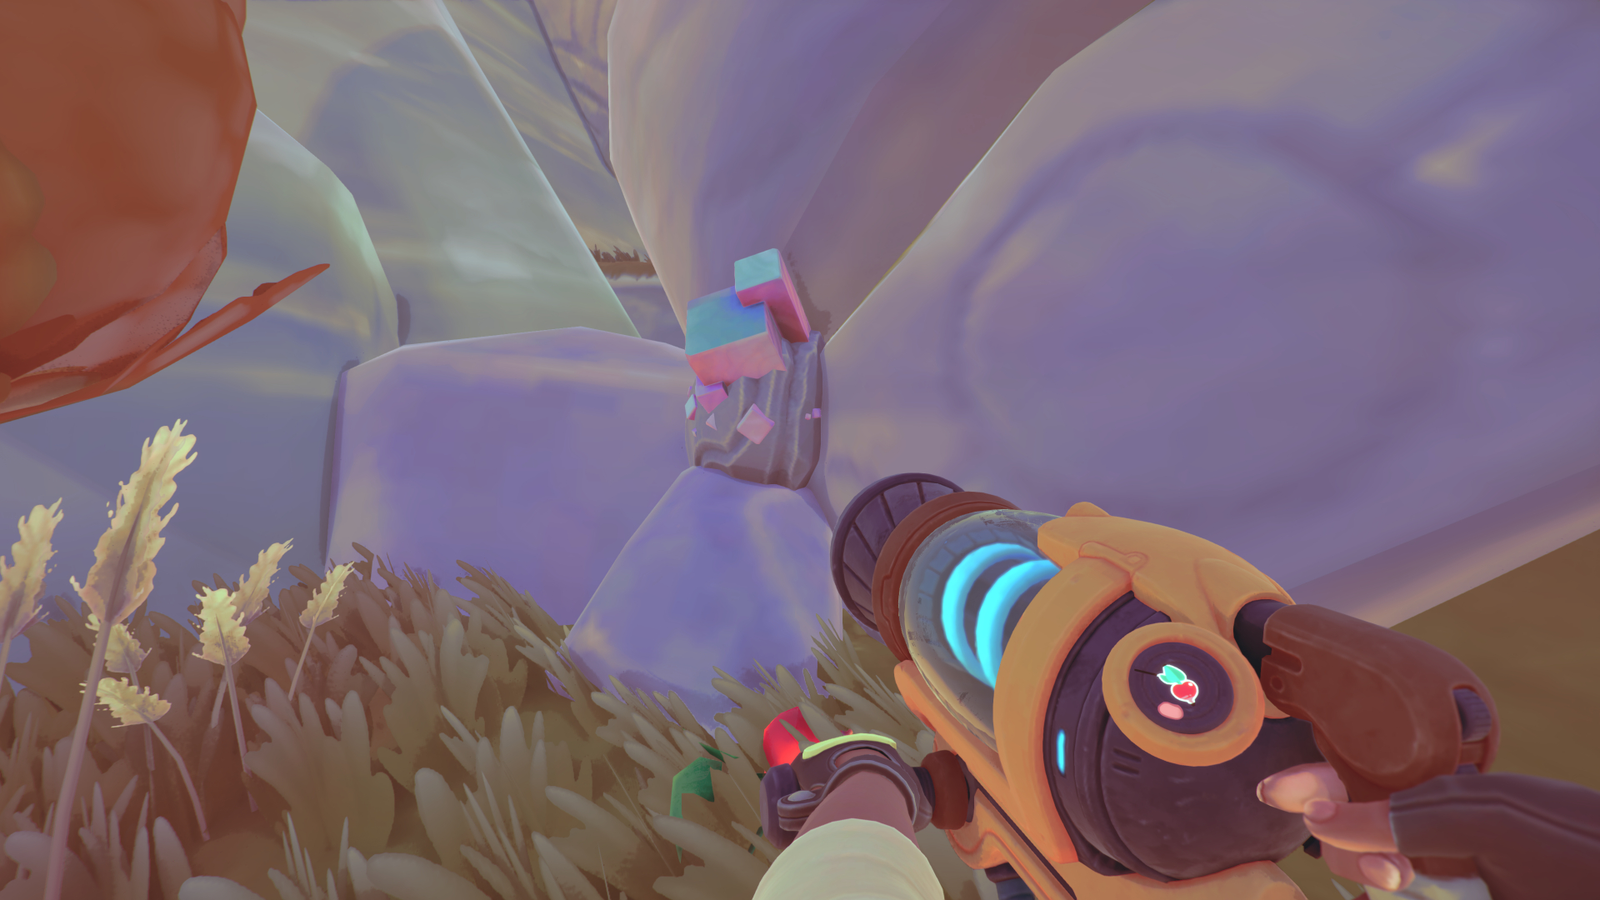 Slime Rancher 2 - Better Than the Original - But Why Tho?